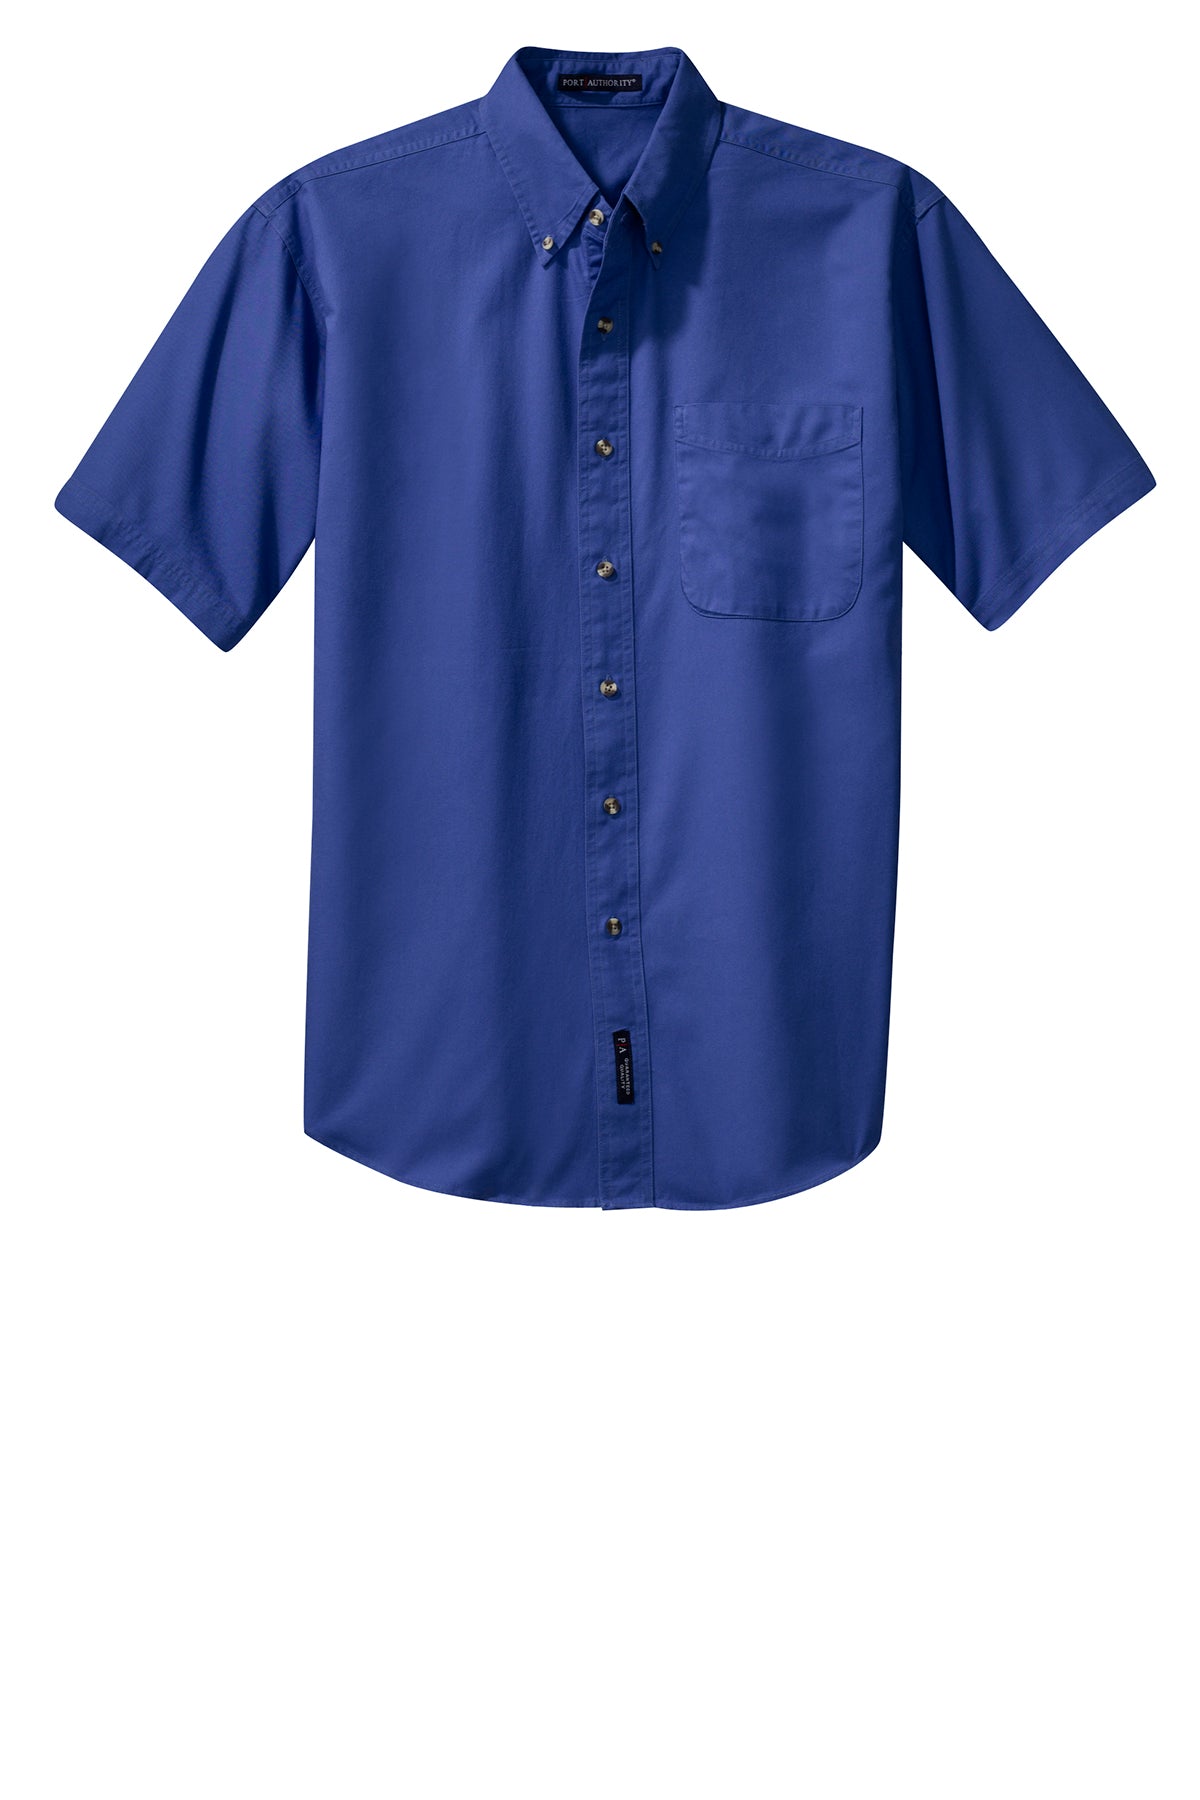 Port Authority® Short Sleeve Twill Shirt - S500T - Faded Blue